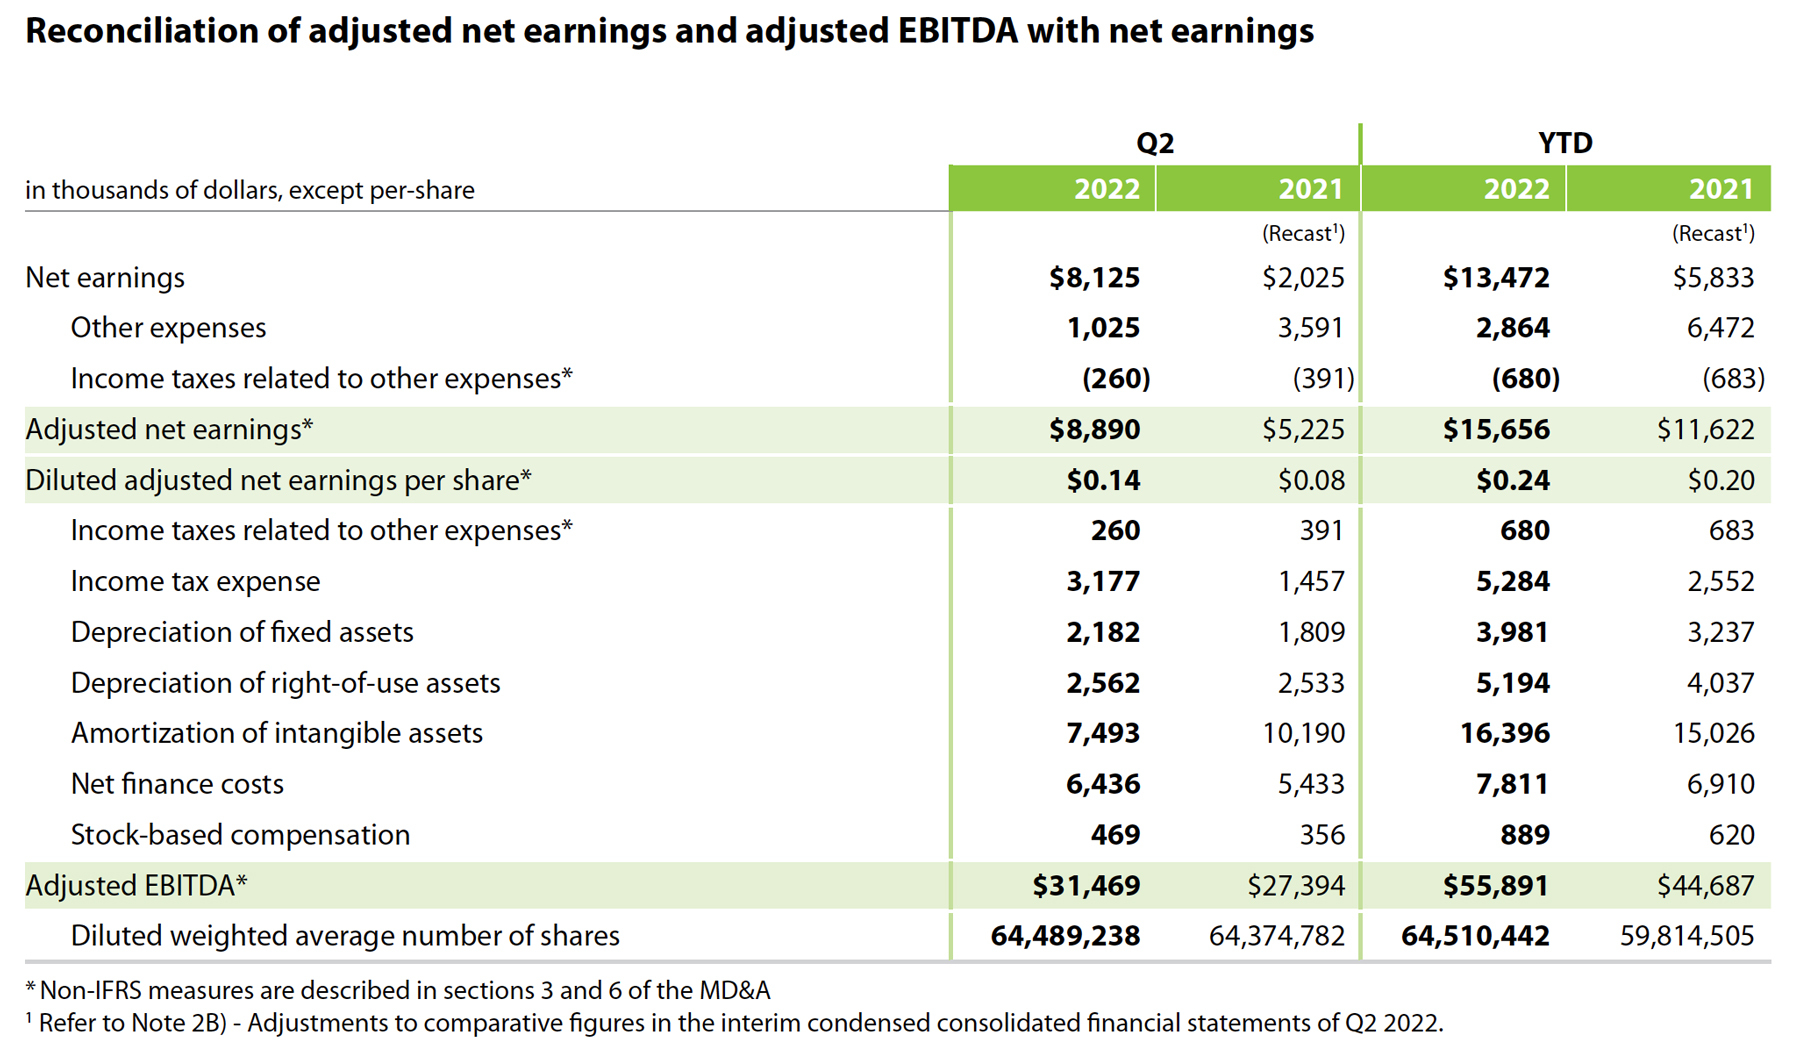 Reconciliation of adjusted net earnings and adjusted EBITDA with net earnings